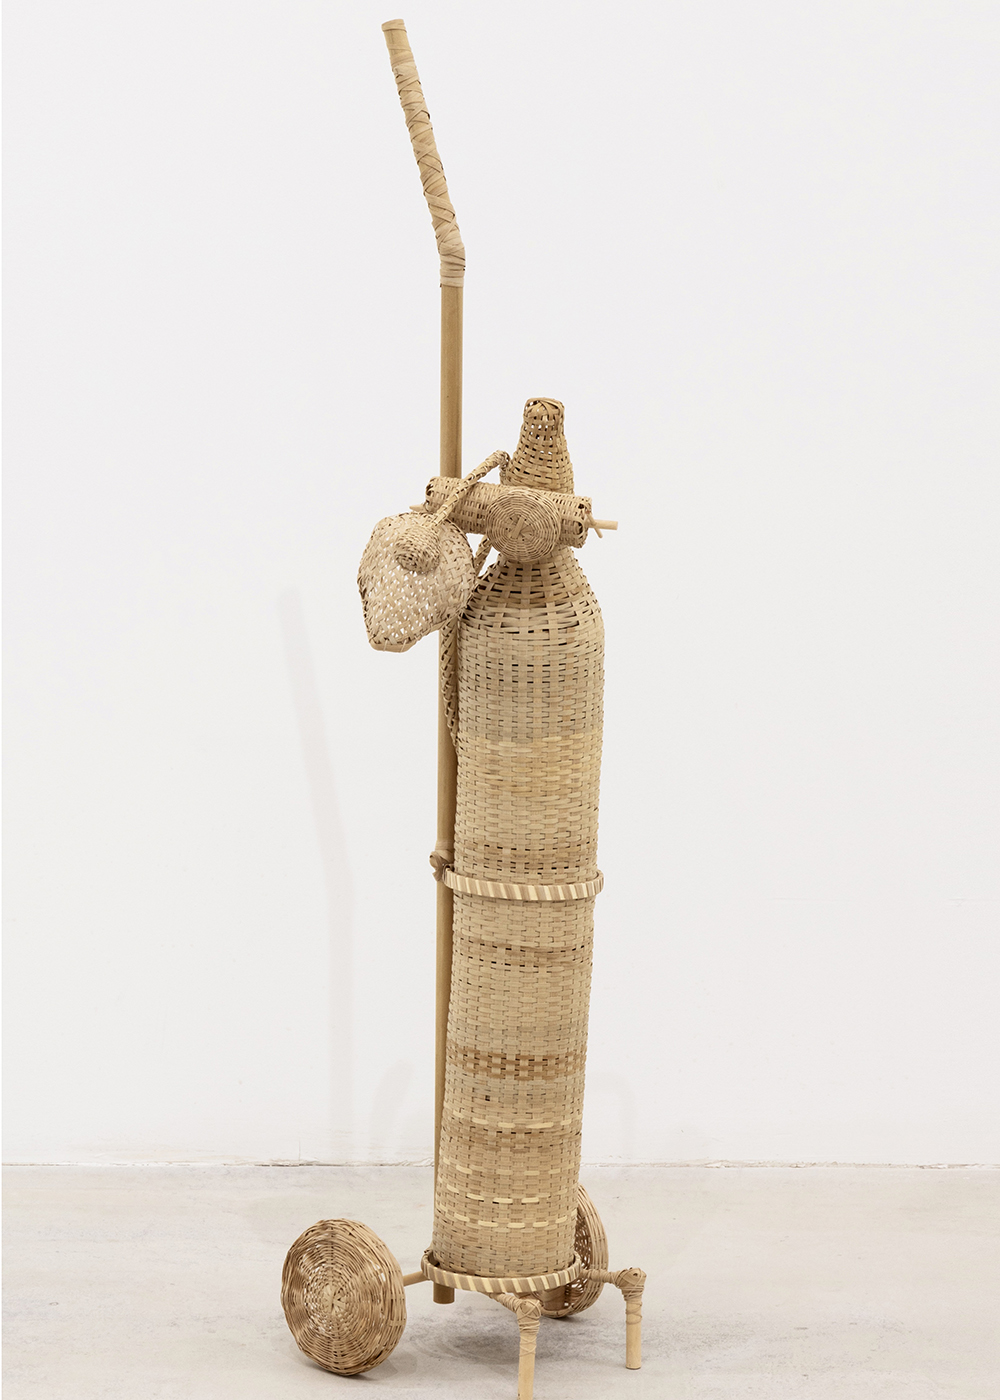 sculpture of what looks like a modern day medical air tank woven from white ash wood fibers